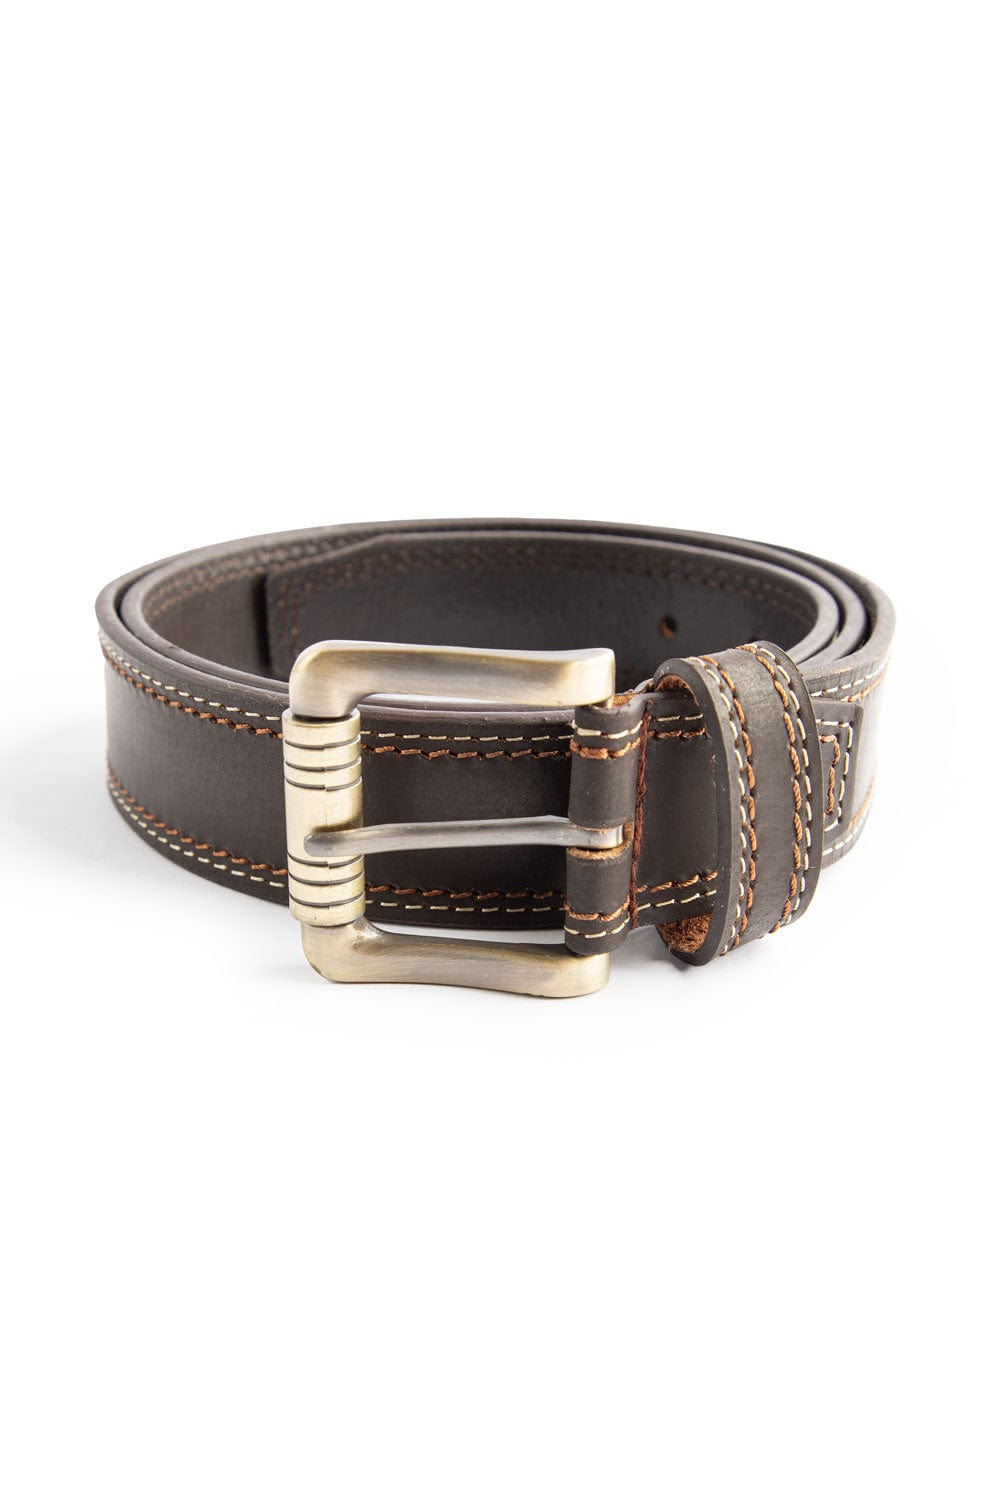 Hope Not Out by Shahid Afridi Men Belts Premium Brown Leather Casual Belt With Calssic Buckle HMBLT210004